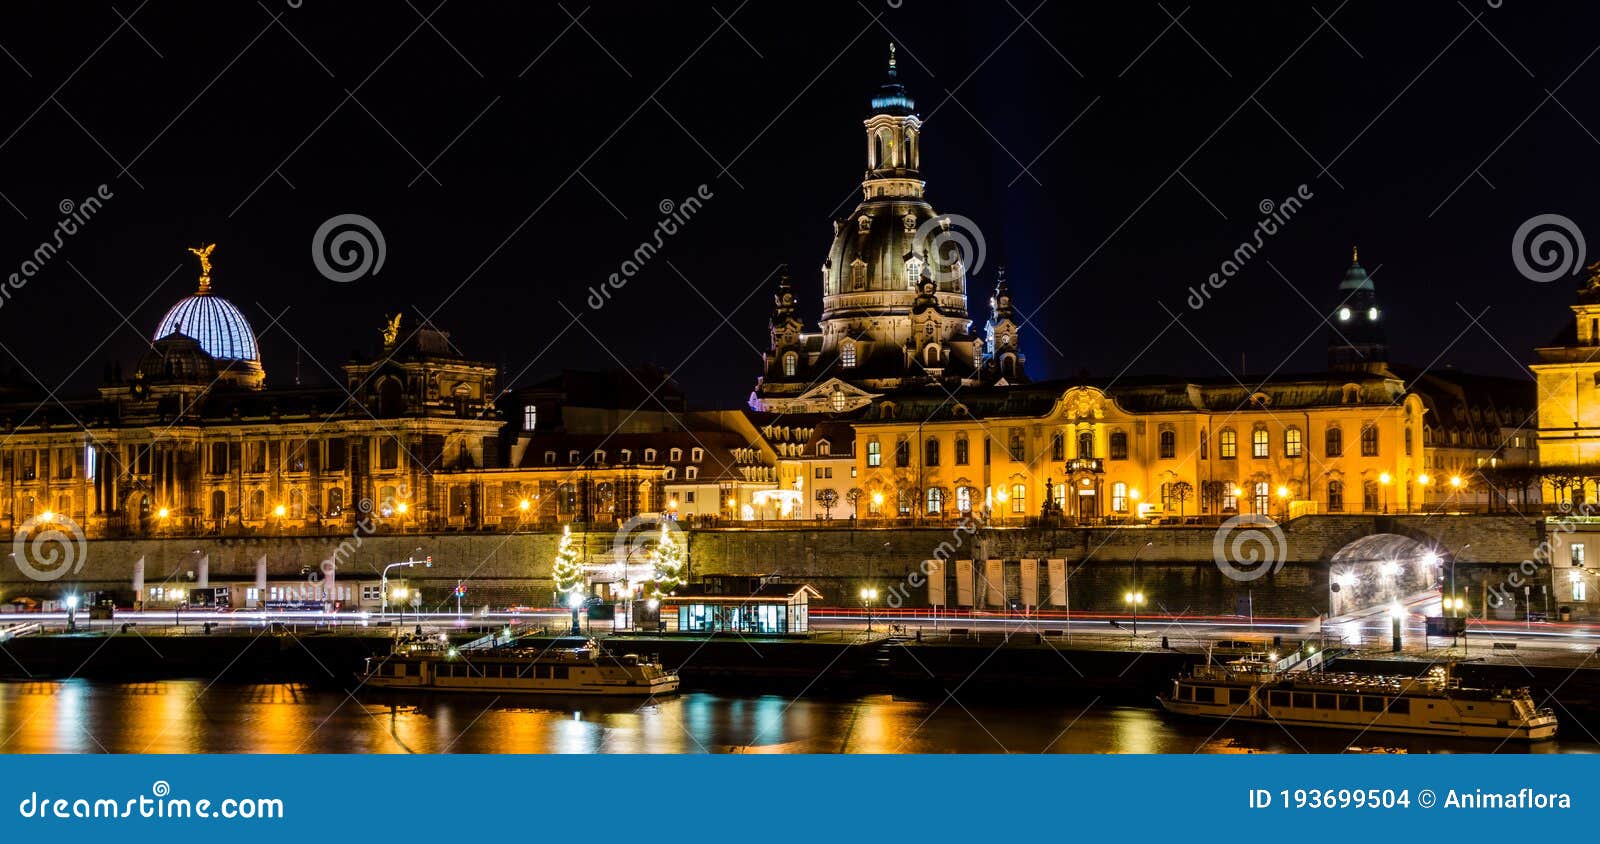 dresden on the banks of the elbe at night